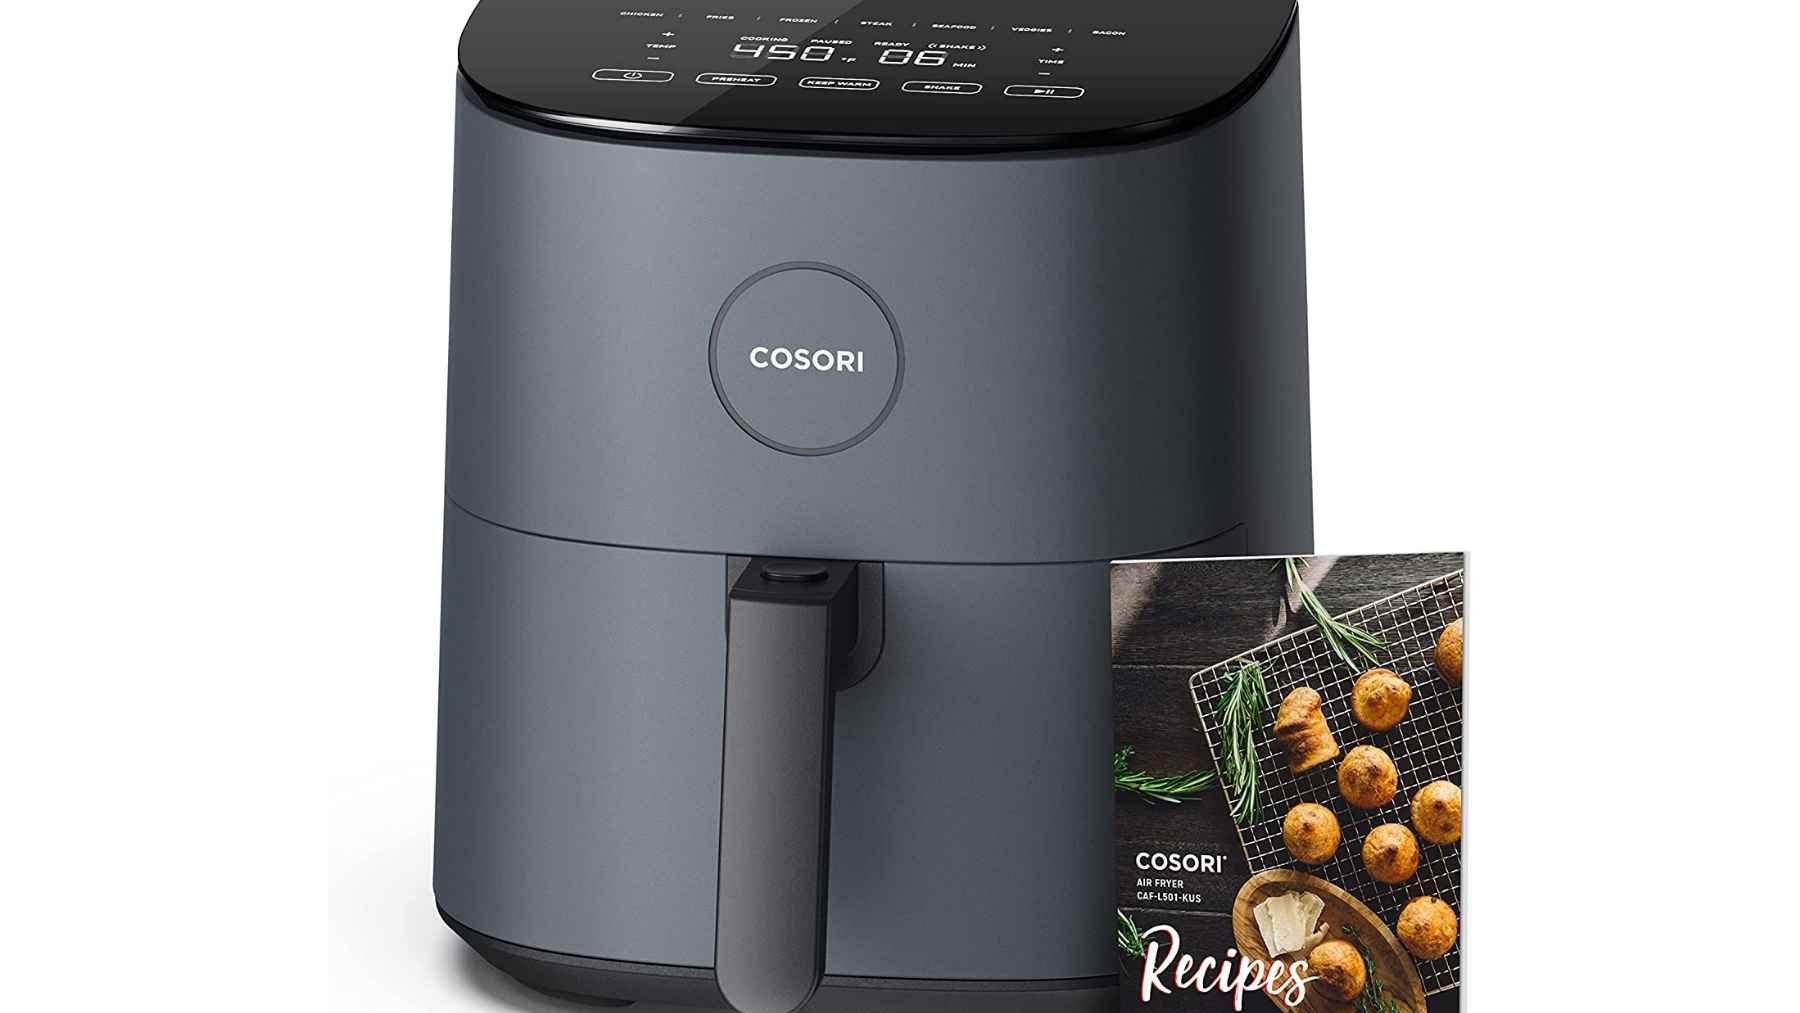 COSORI air fryer by Amazon